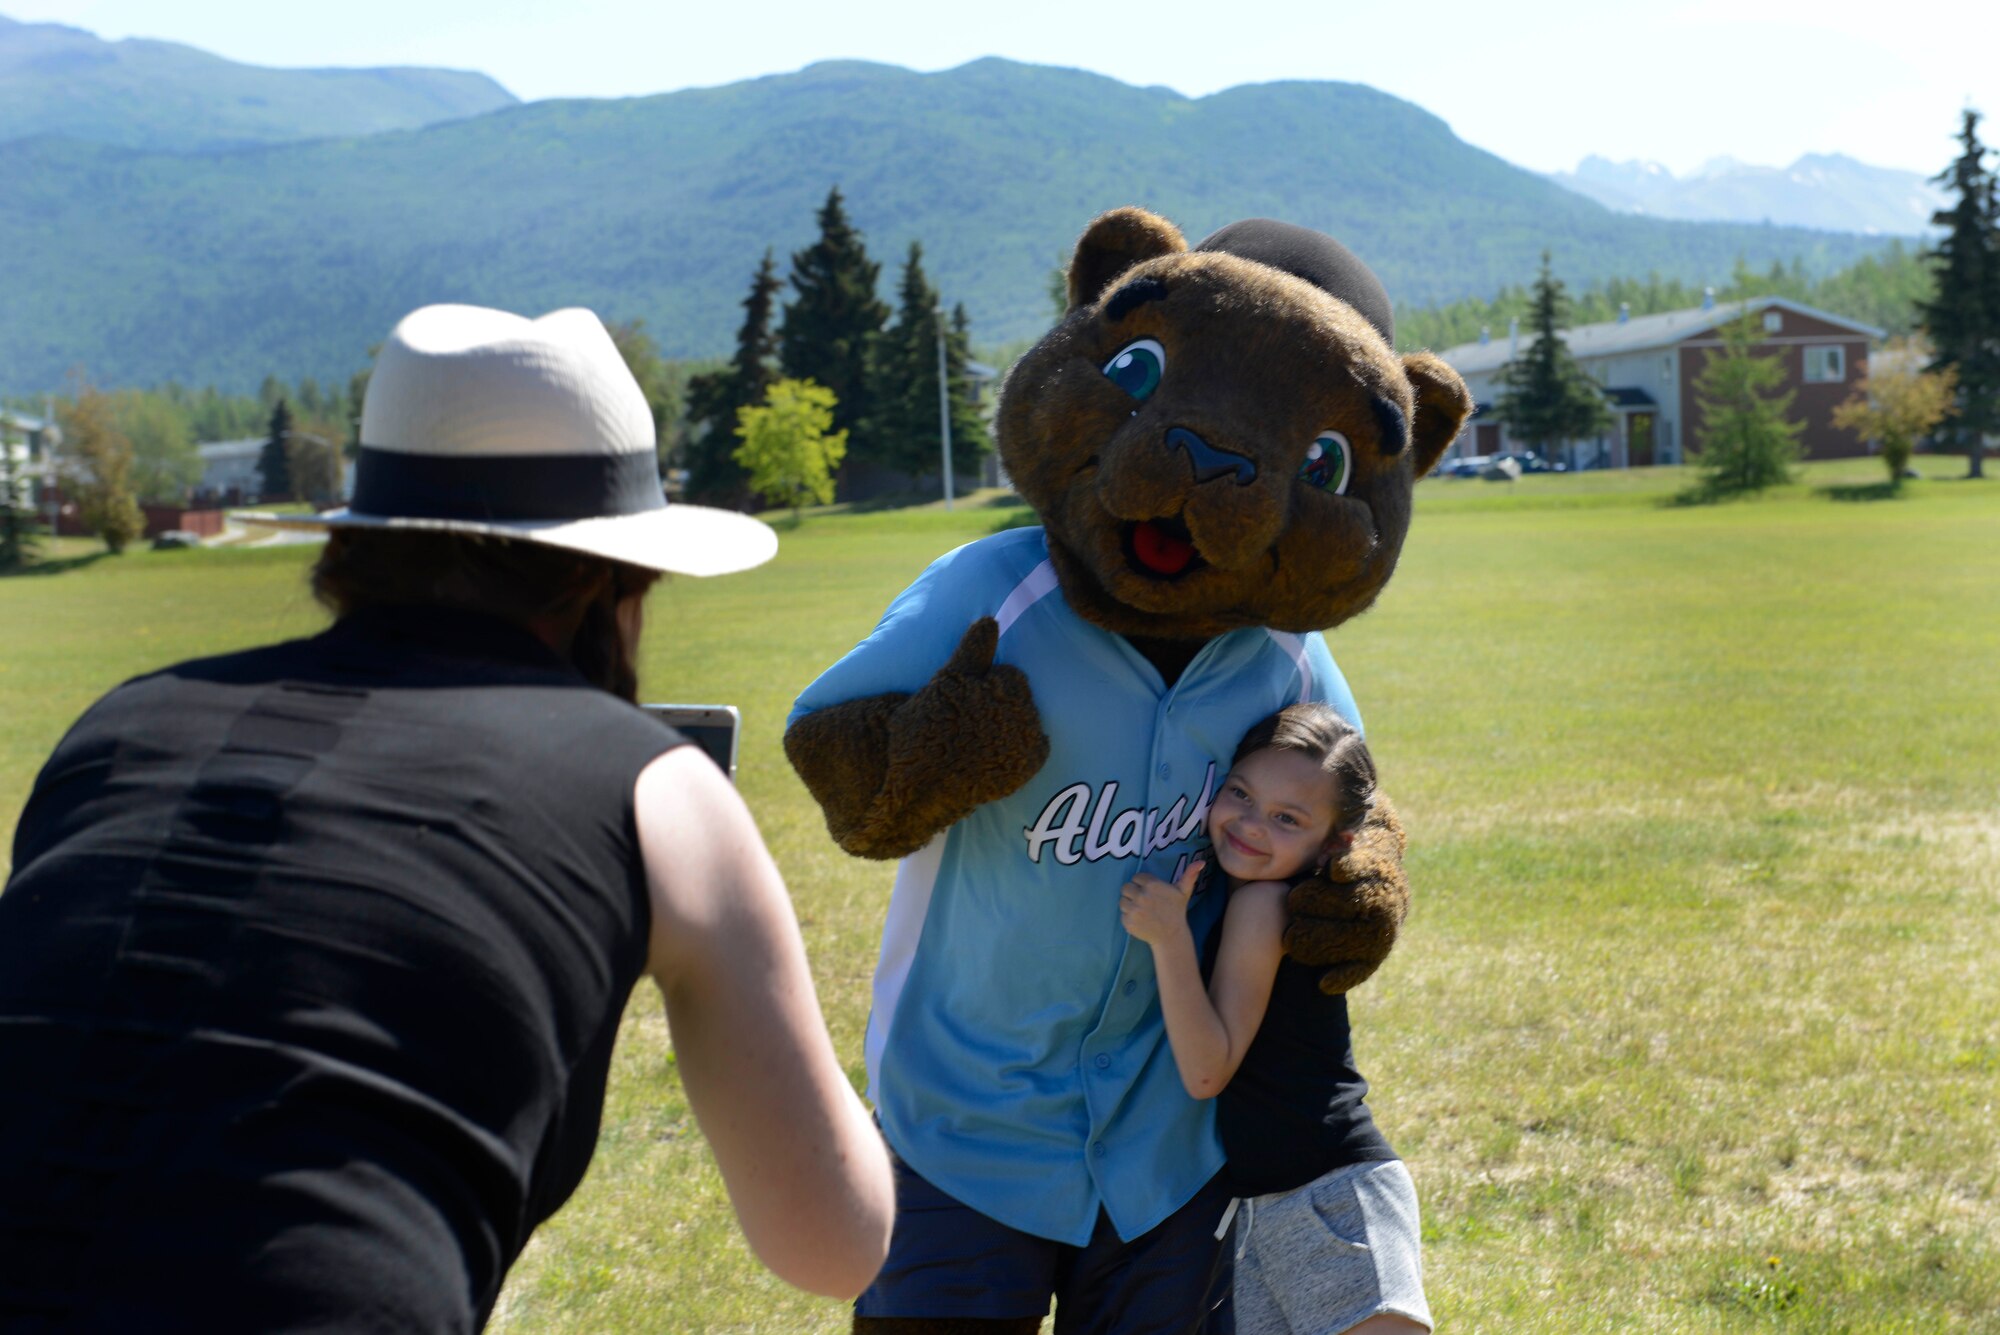 Participants in the Read for the Win summer reading program, meet “Kodi” from the Alaska Aces, at the Joint Base Elmendorf-Richardson Library, Alaska, June 16, 2016. The library will host various outdoor activities in support of the program. (U.S. Air Force photo by Airman 1st Class Valerie Monroy)